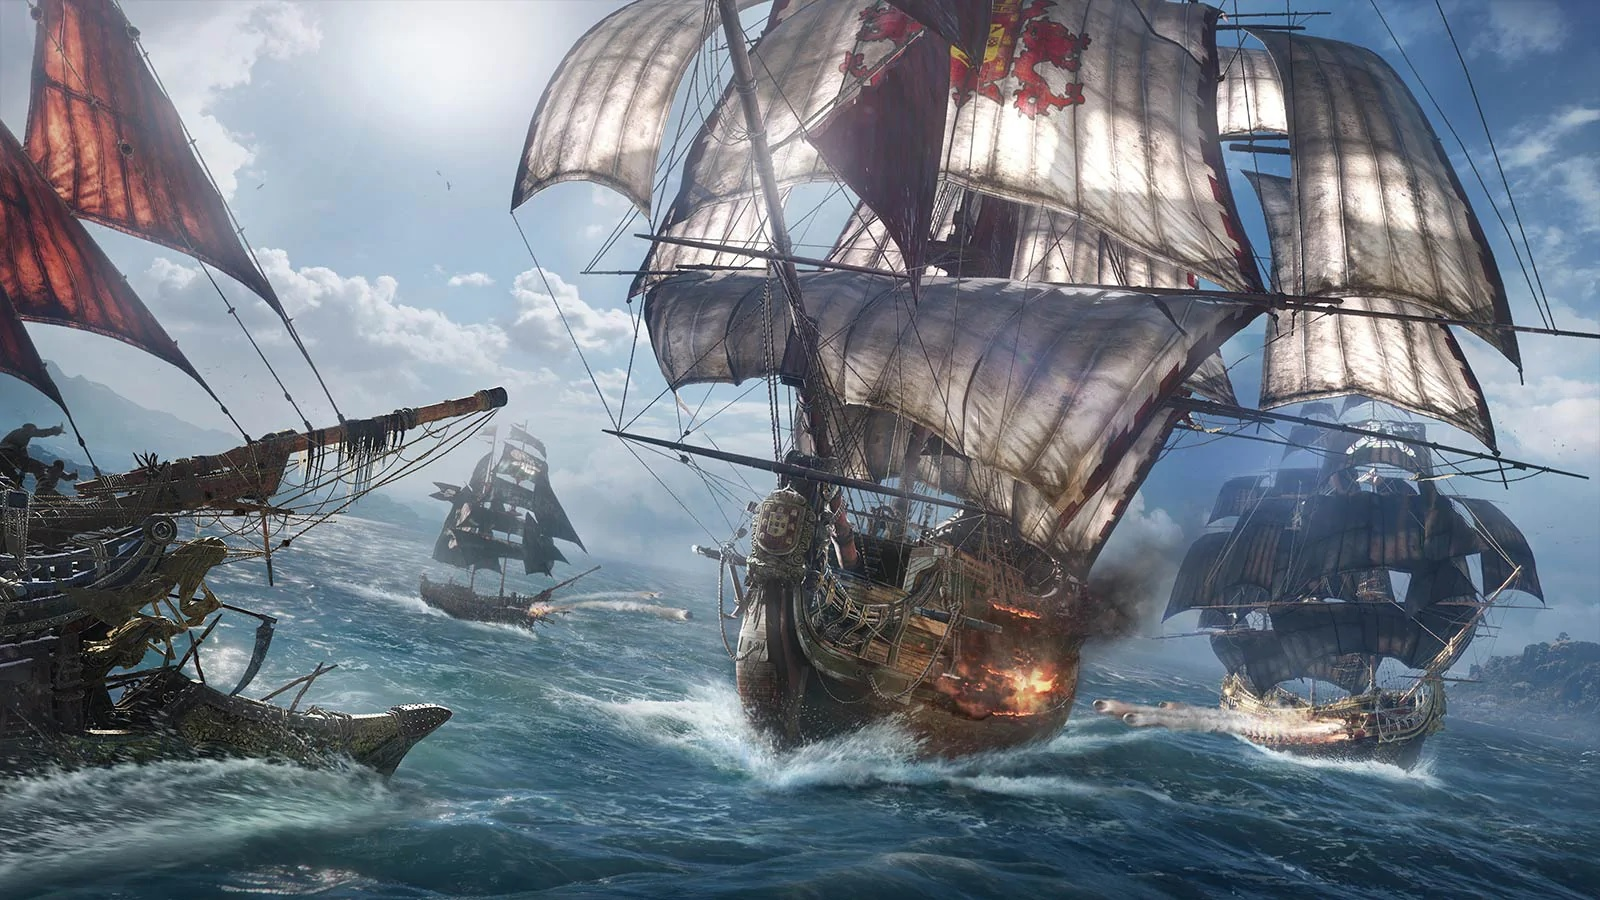 Believe it or not, Ubisoft is doing another Skull and Bones closed beta  later this month